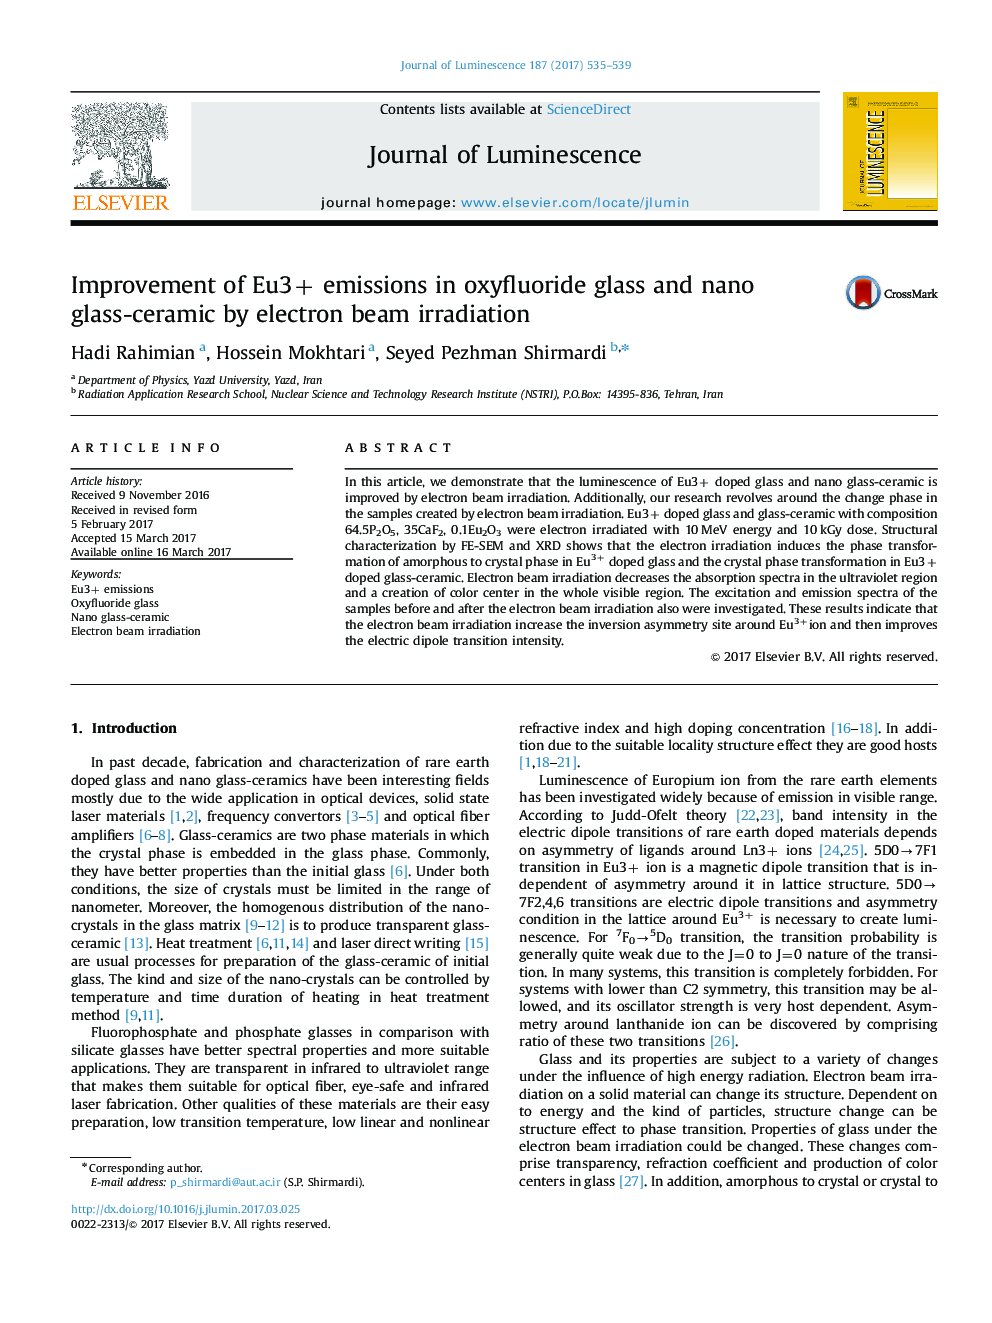 Improvement of Eu3+ emissions in oxyfluoride glass and nano glass-ceramic by electron beam irradiation